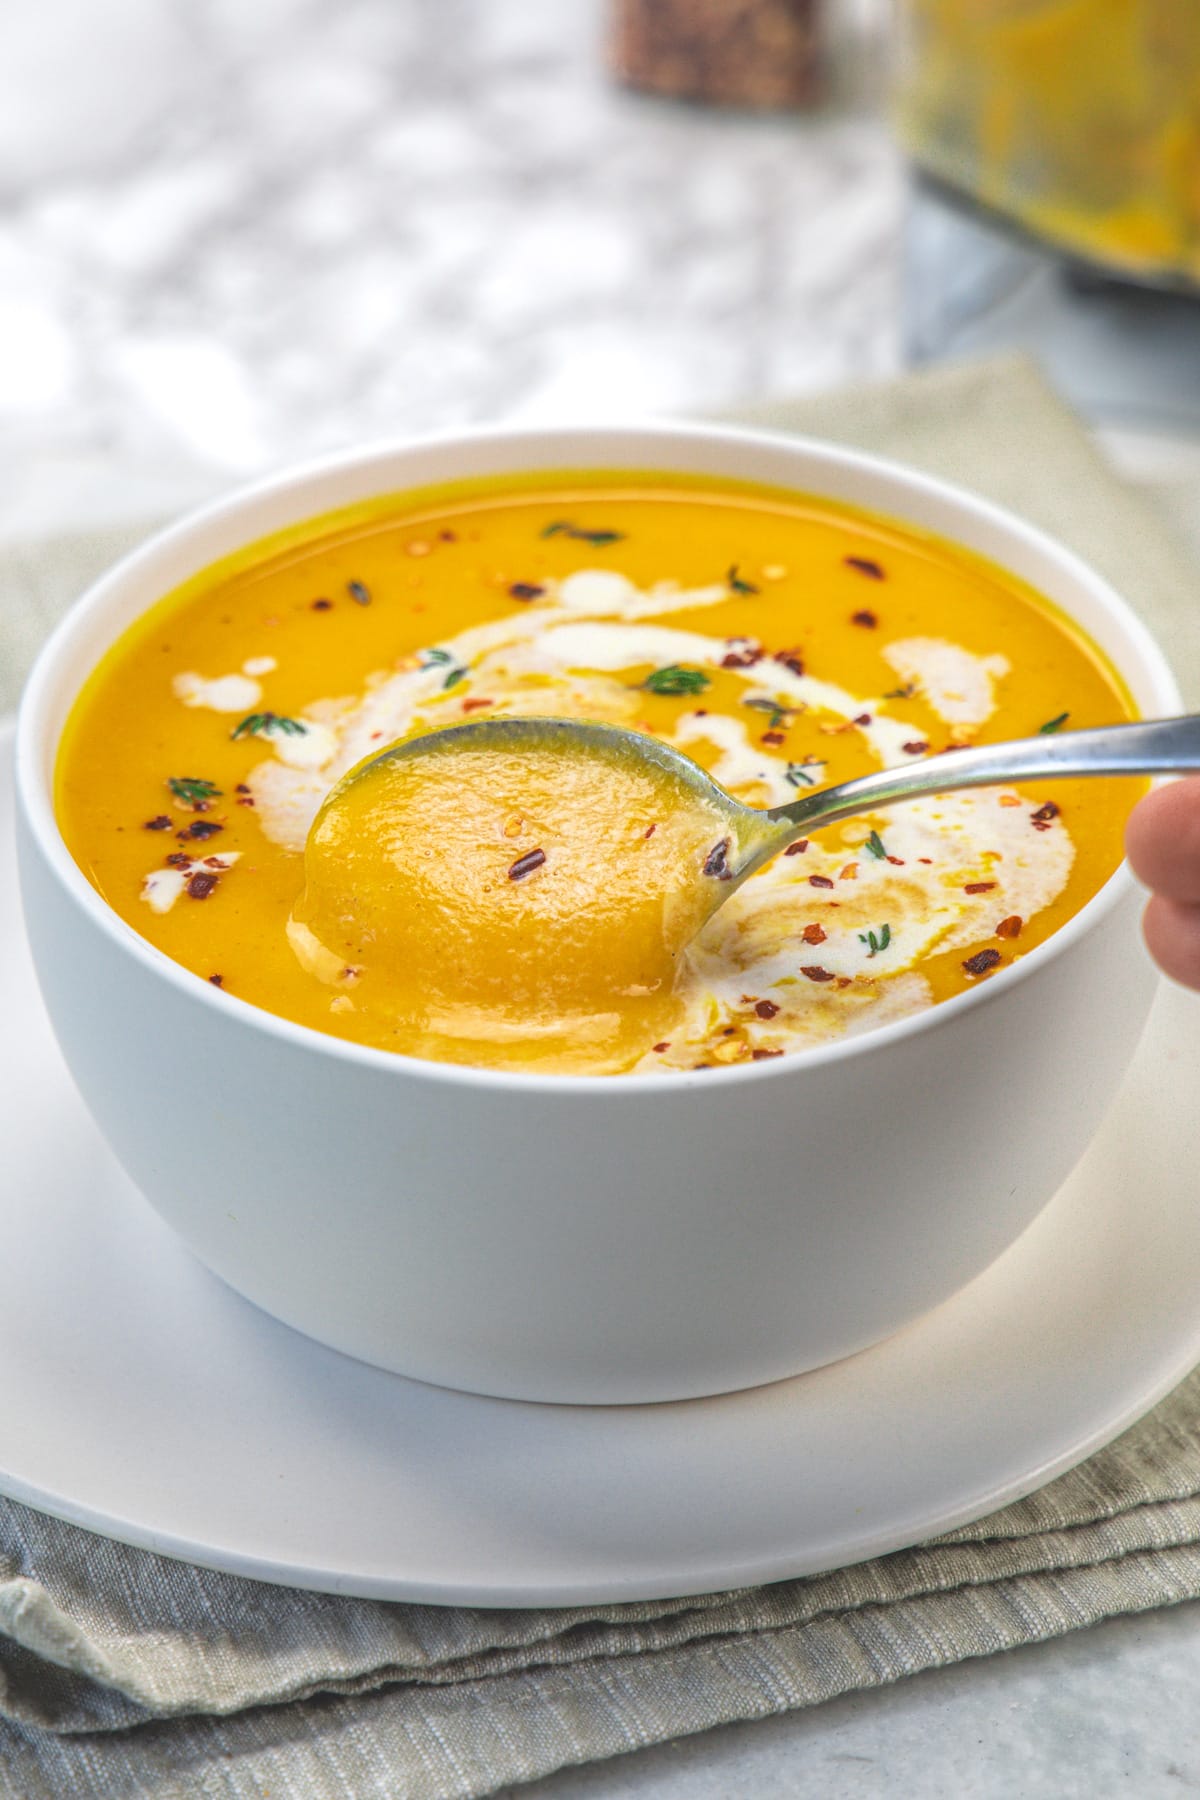 Taking a spoonful of roasted butternut squash soup from the bowl.